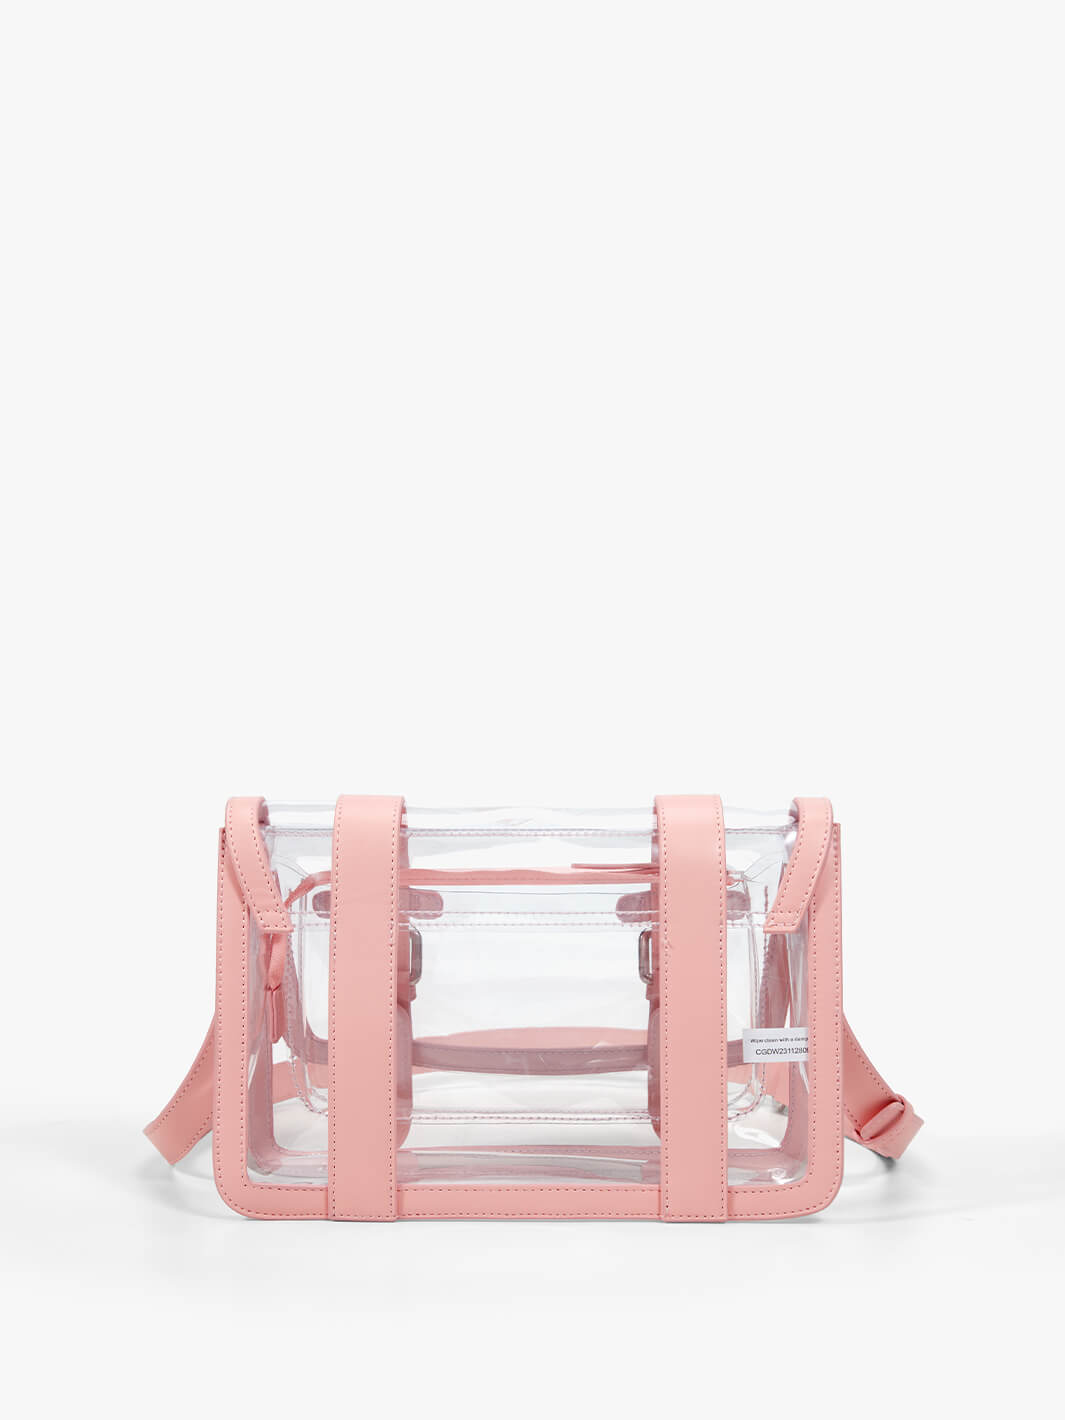 Clear Designer Crossbody Bag with Quality PVC and Vegan Leather